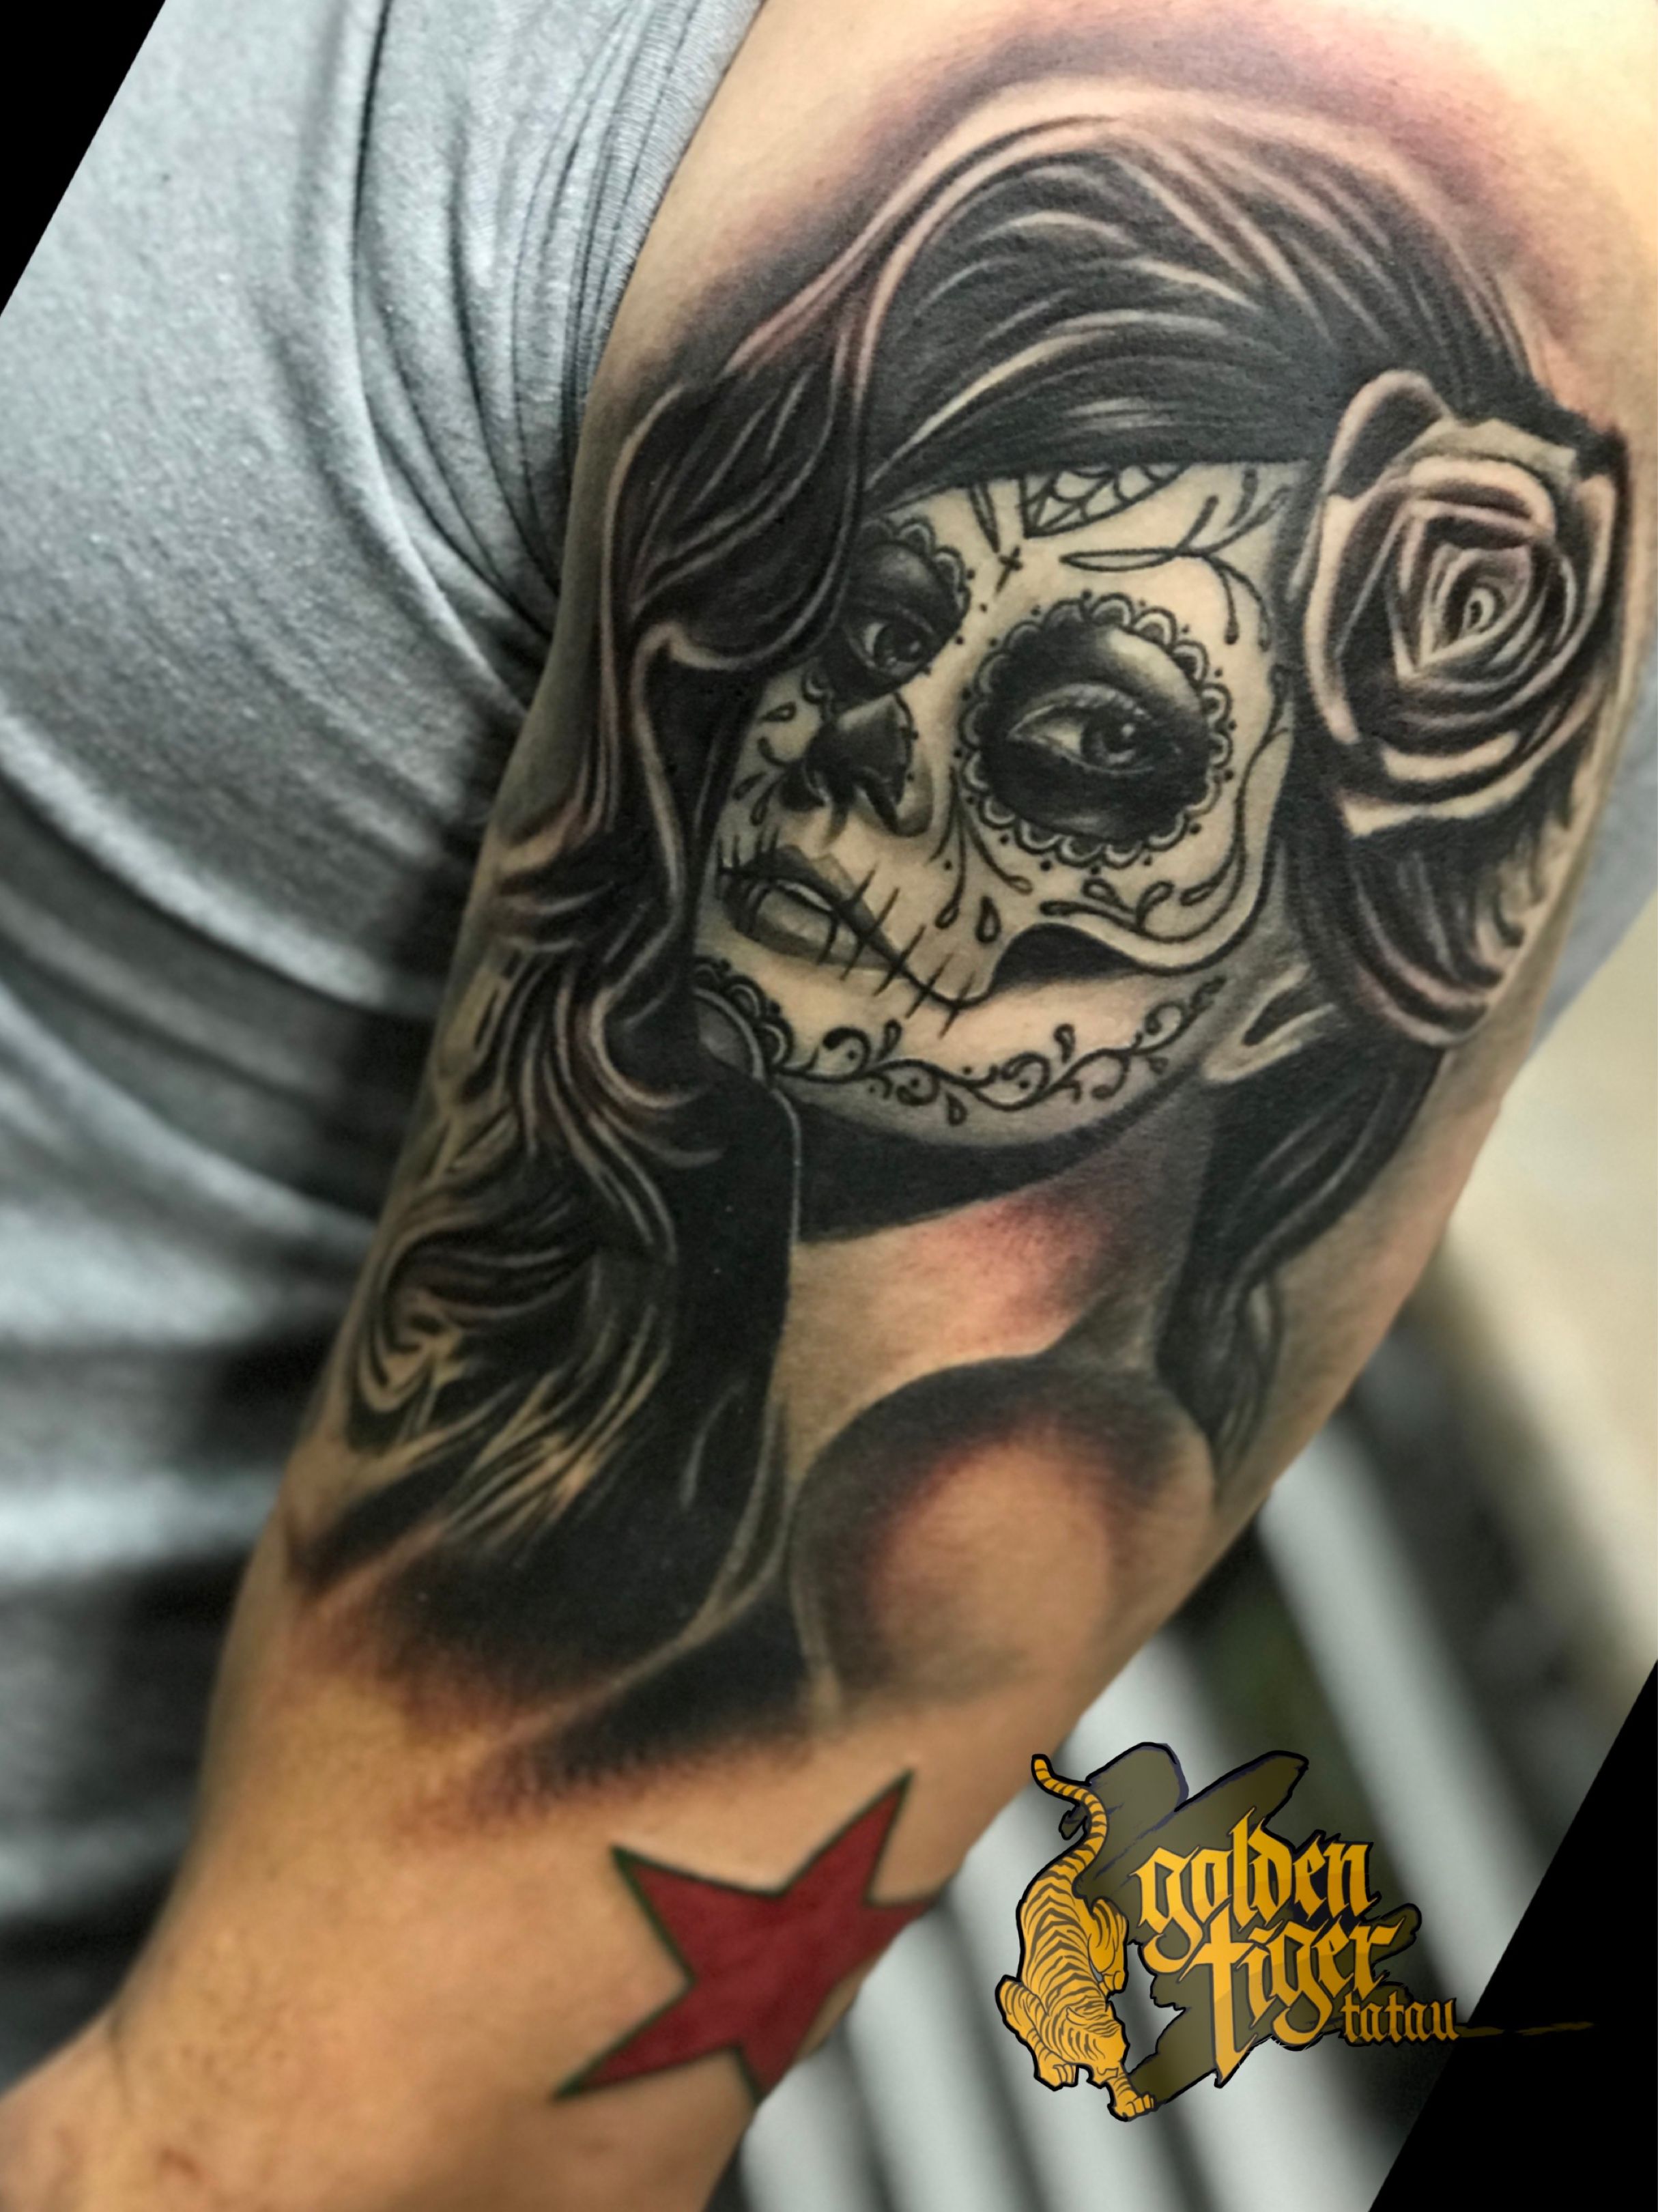 Patrick Tattoo Artist of Orange County Tattoo Studio in the city of  Westminster California — OC Tattoos and Piercings